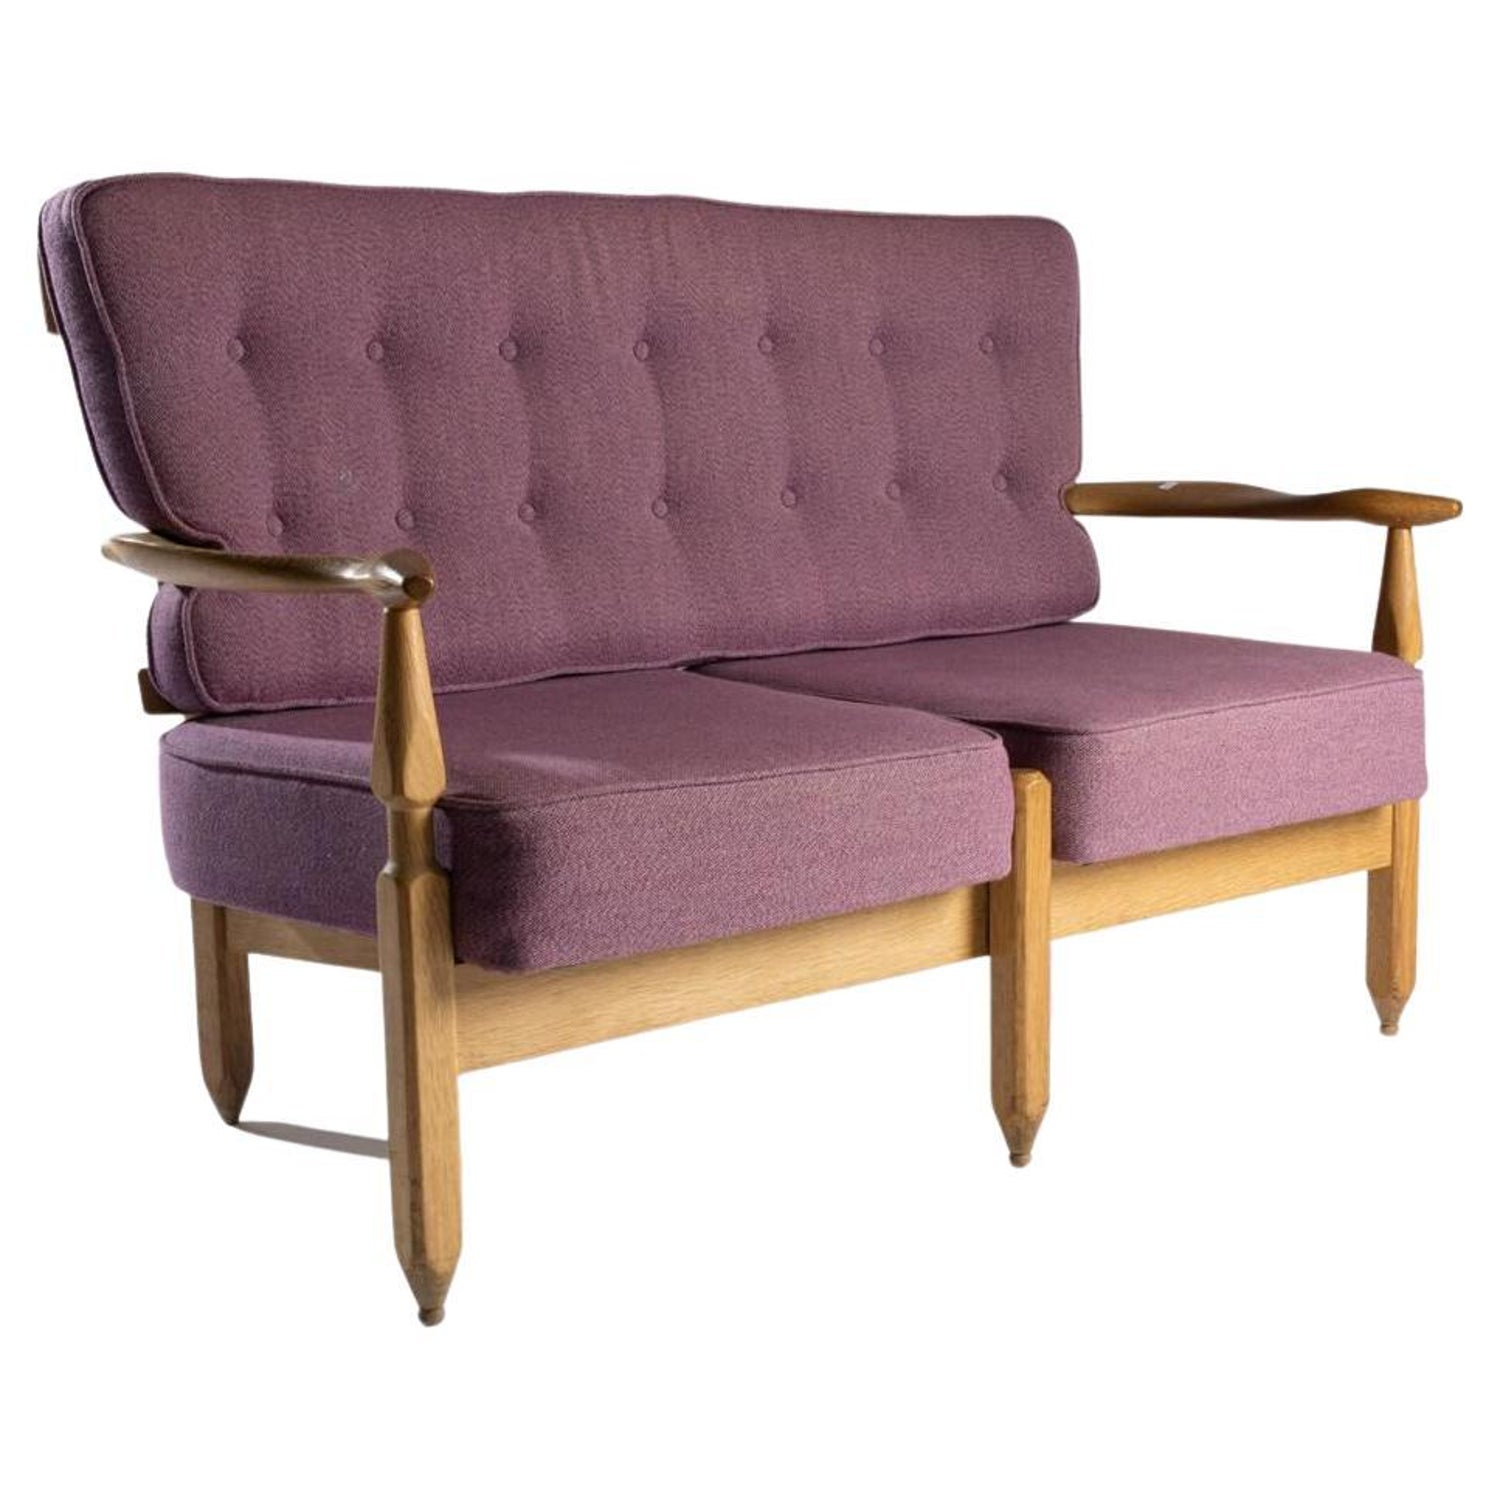 Guillerme et Chambron Oak Settee with Lamp, France 1950's at 1stDibs